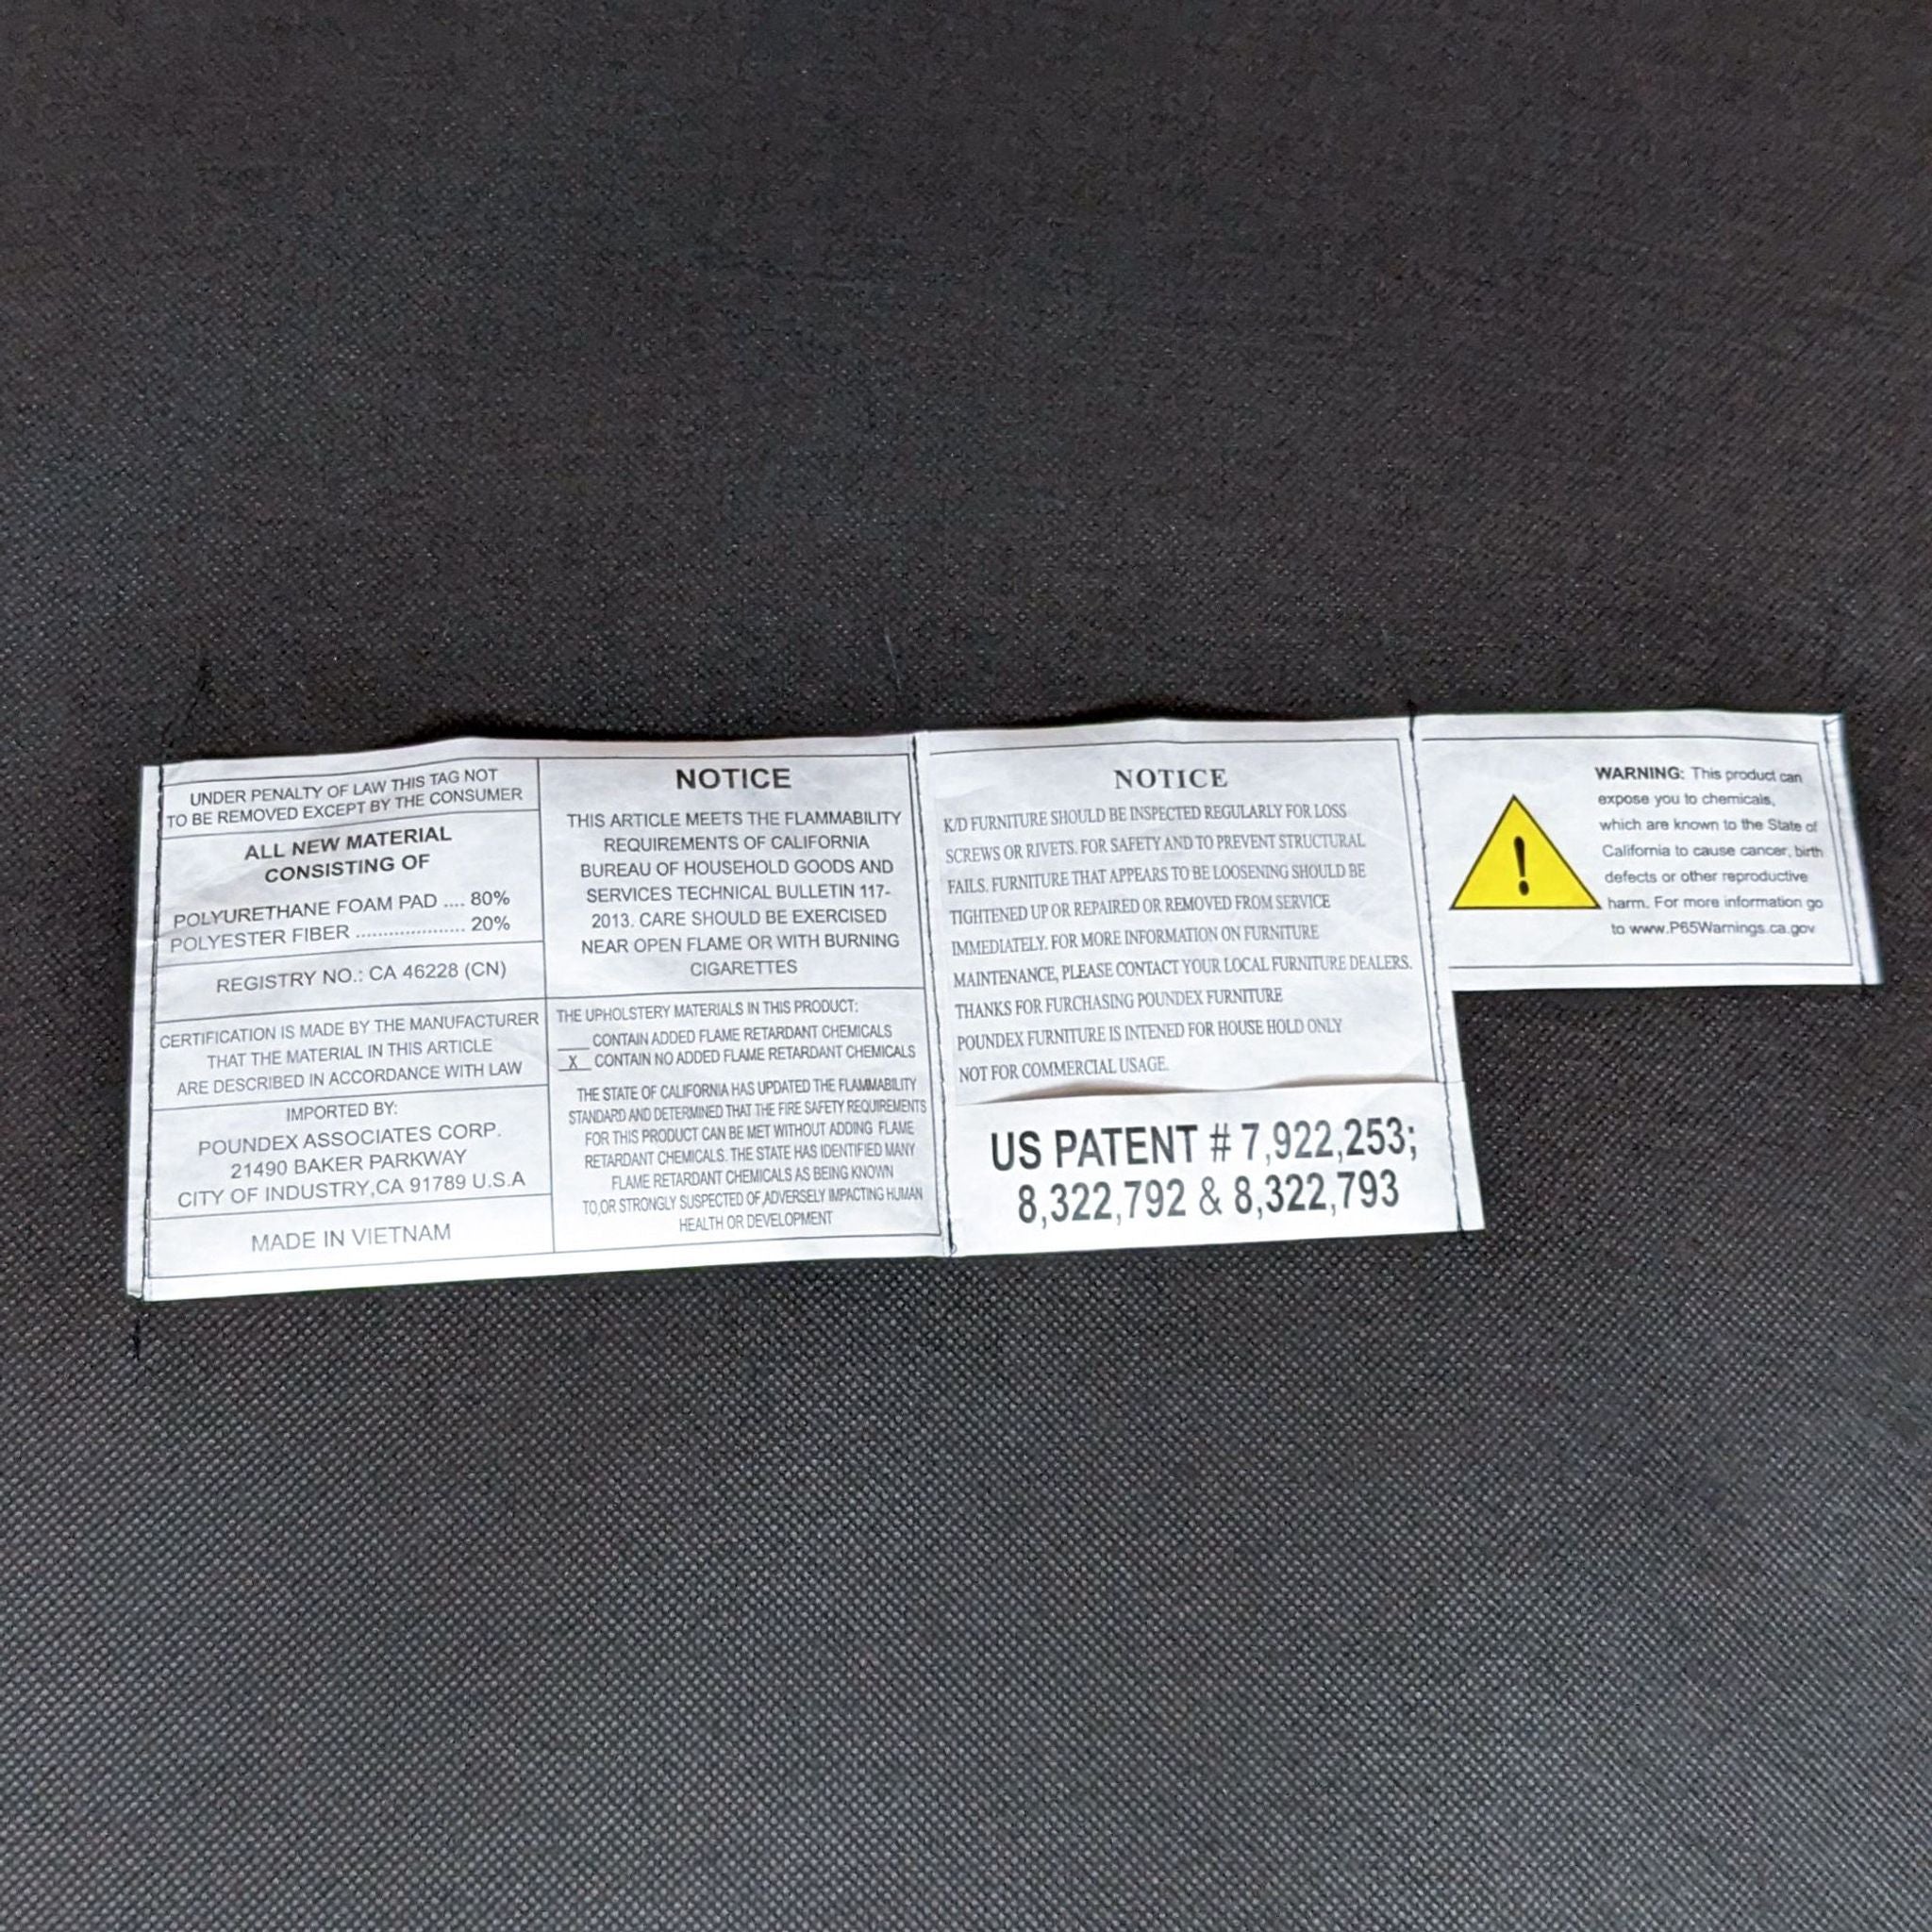 Tags and warning labels on gray fabric of a Reperch sectional, indicating material composition, safety notices, and patents.